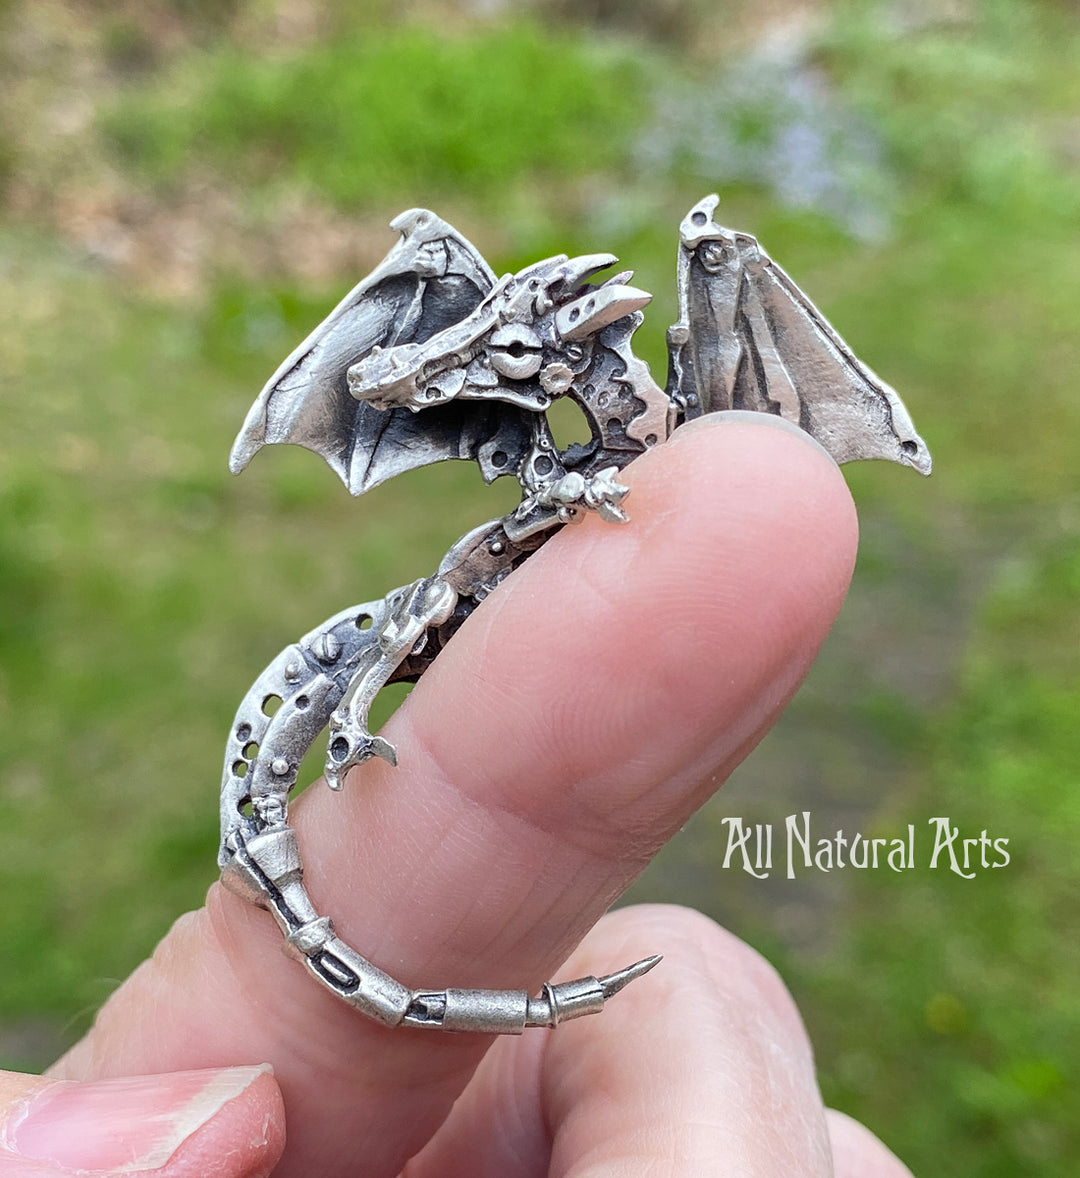 Sue Beatrice's silver finger dragon pendant perched on a finger.